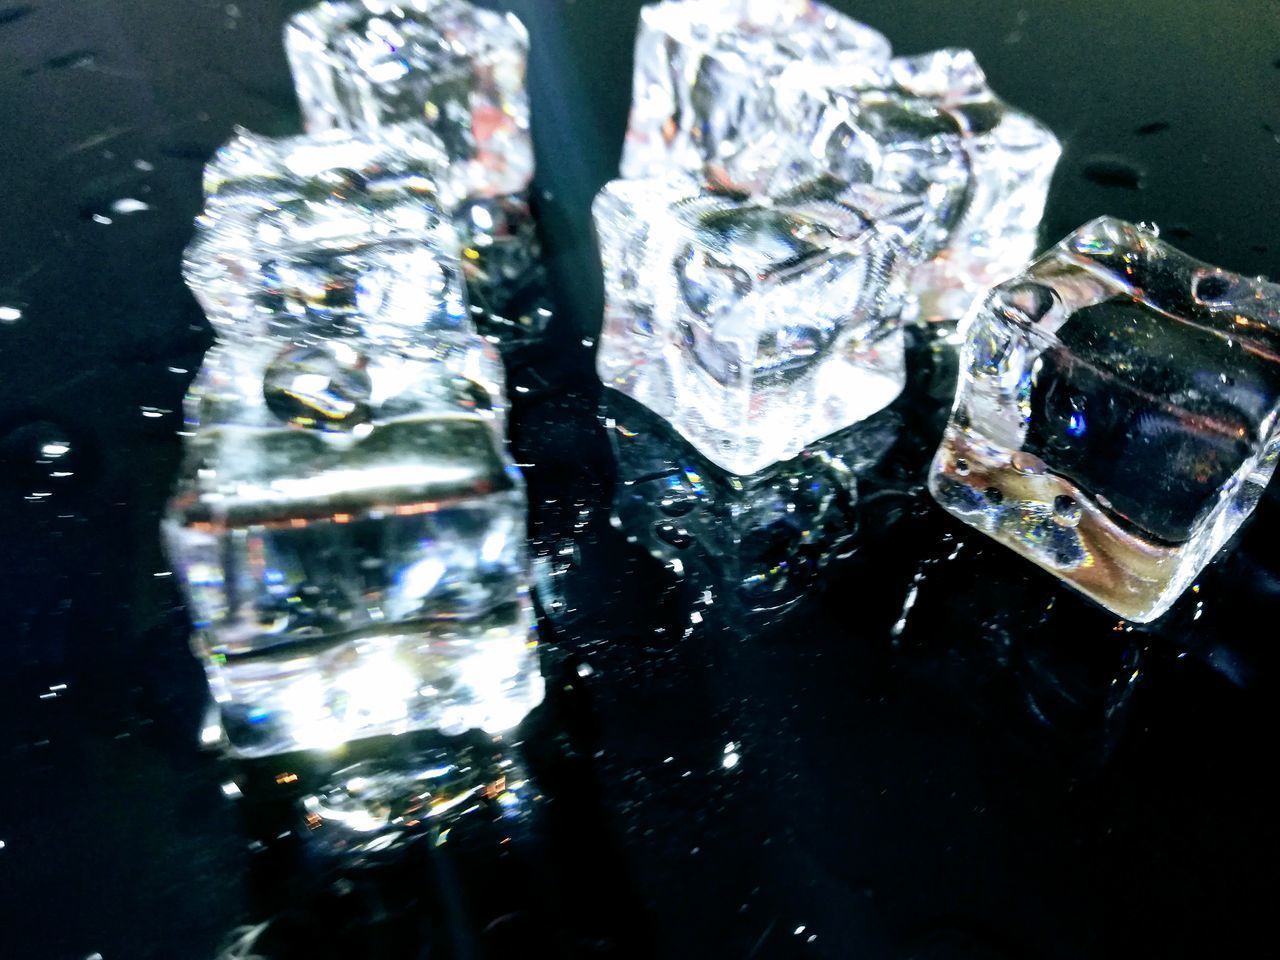 HIGH ANGLE VIEW OF ICE CUBES IN GLASS